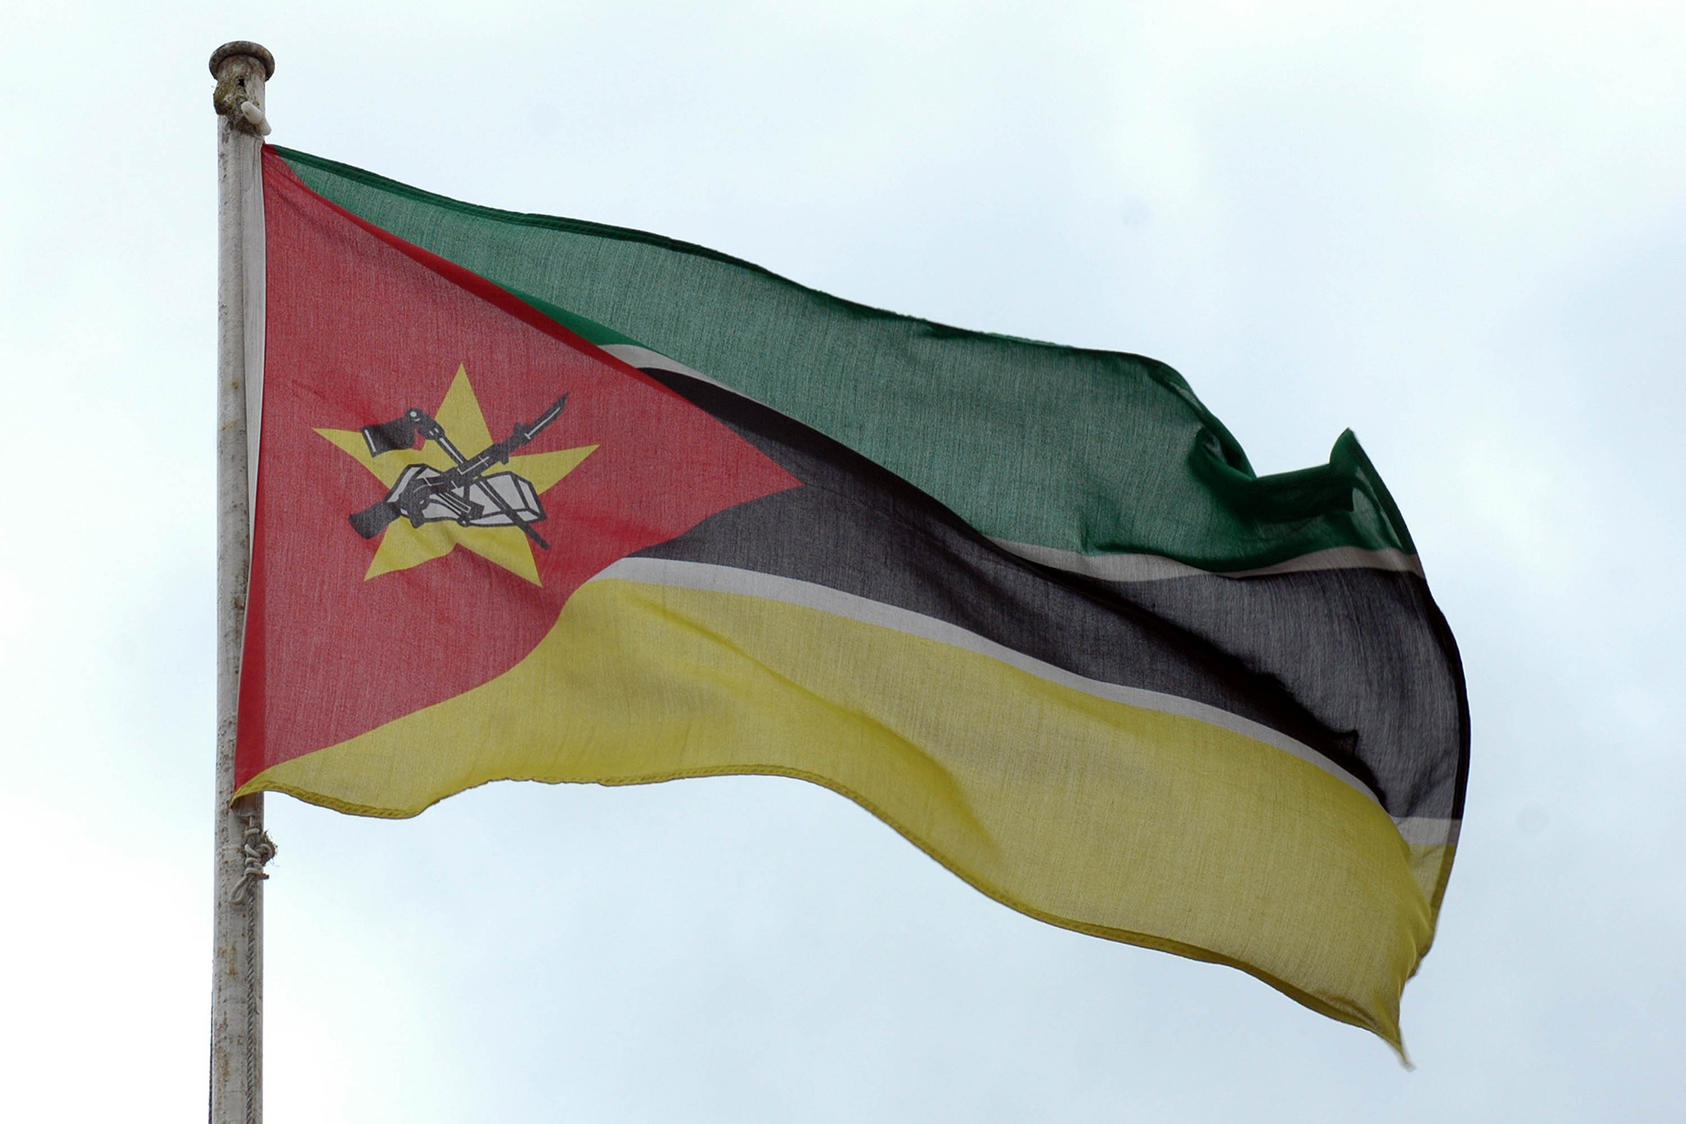 Mozambique's flag is pictured in the capital city of Maputo. September 30, 2005. (Henner Frankenfeld/The New York Times)